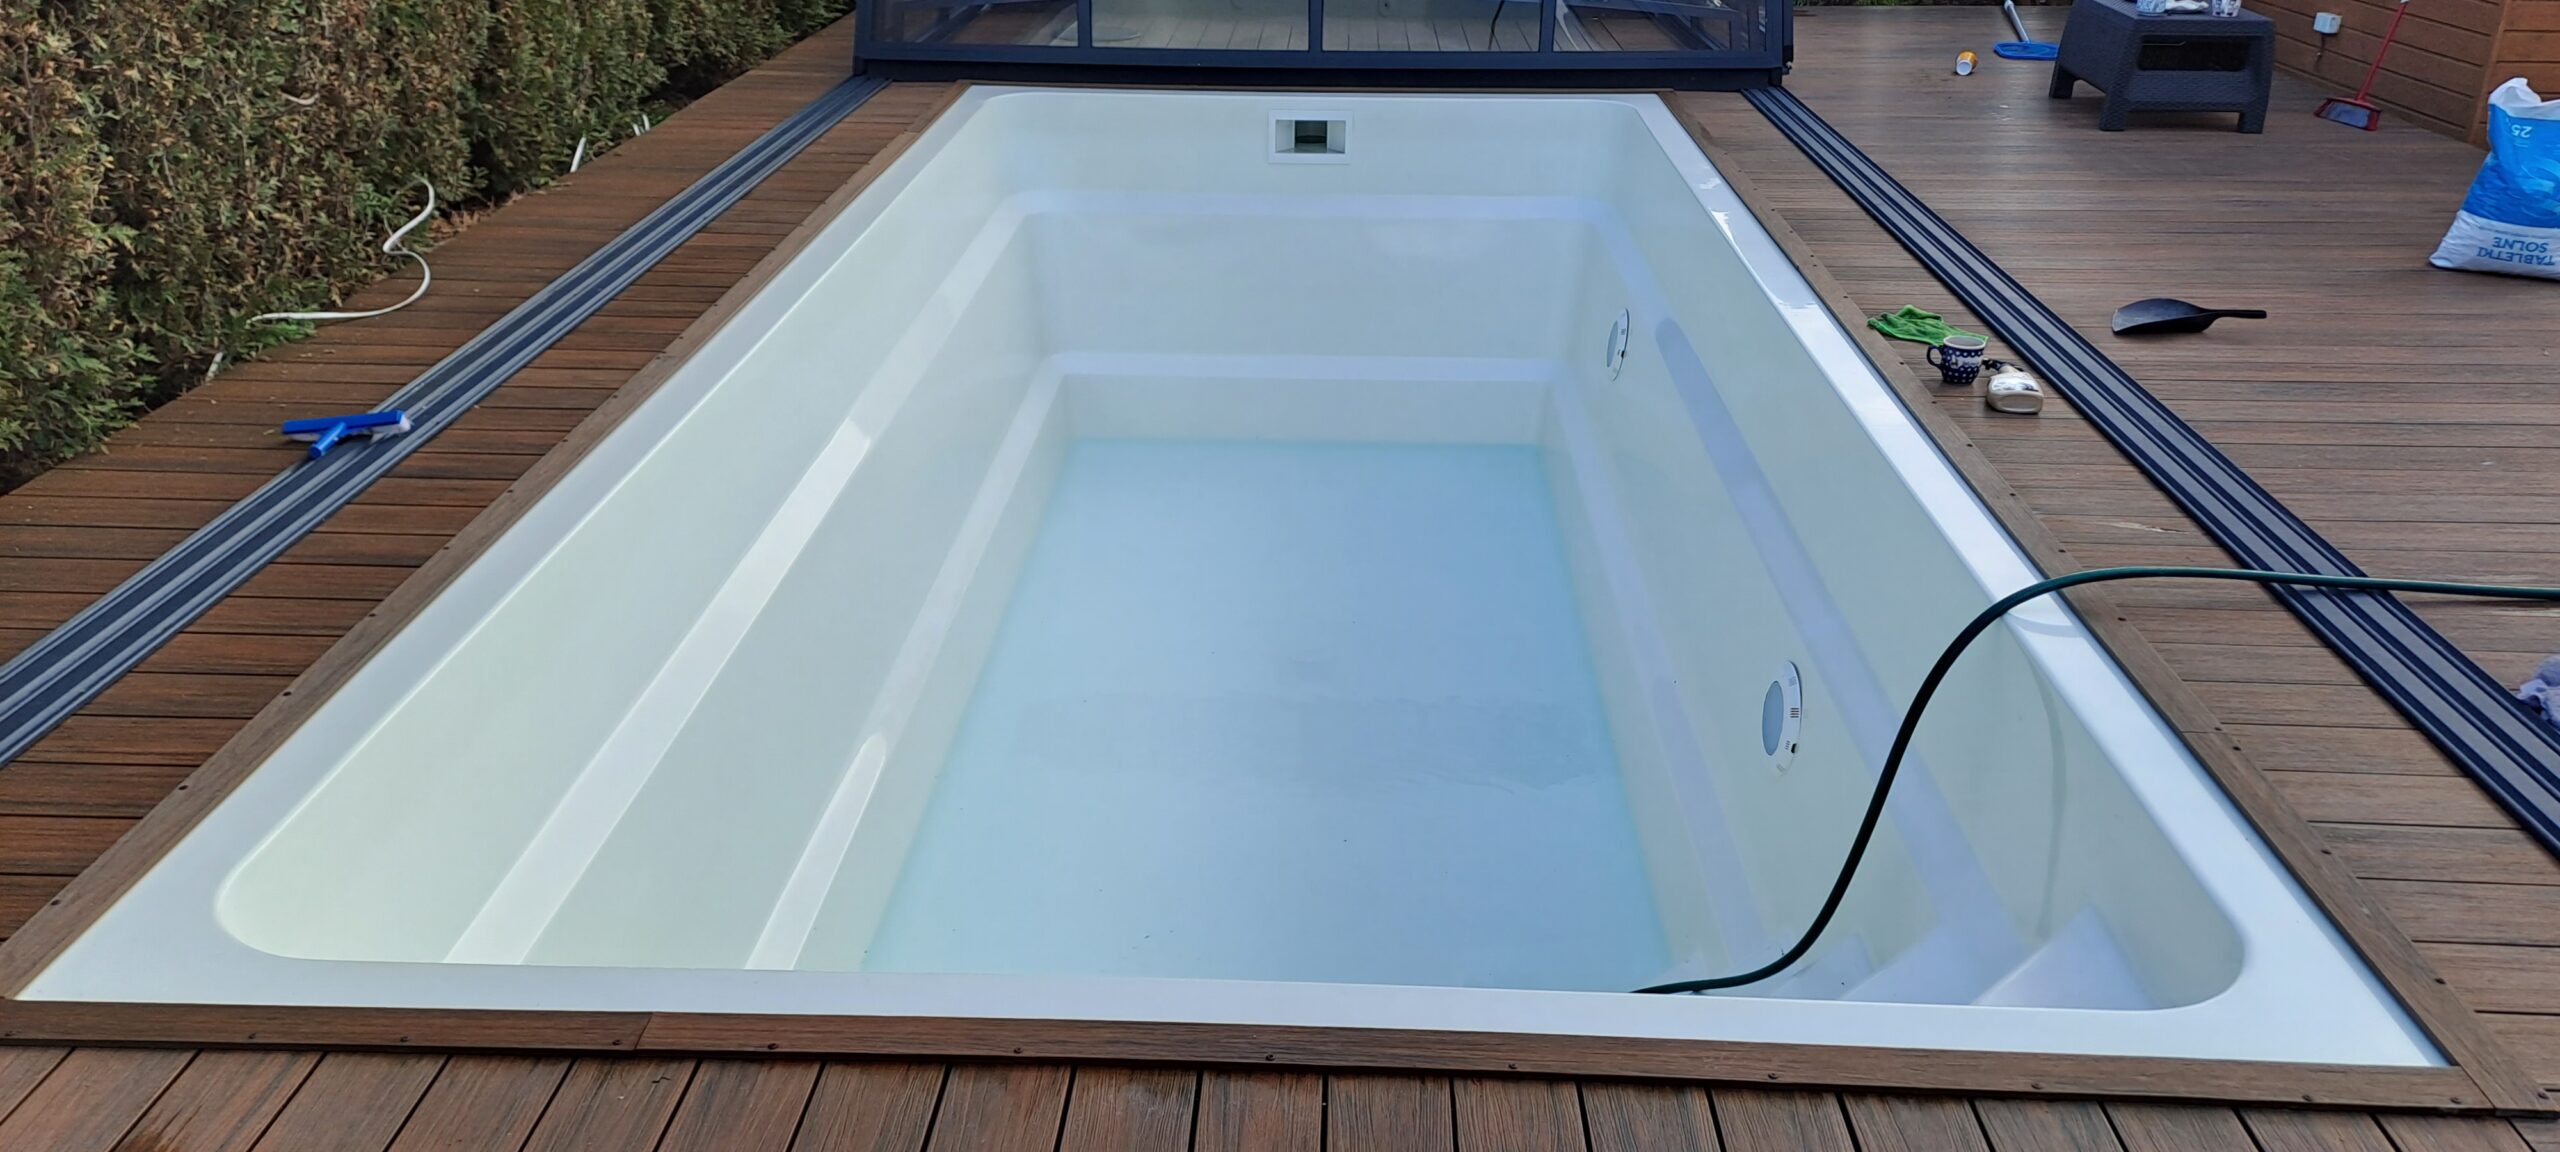 Filling the cleaned polyester pool with water